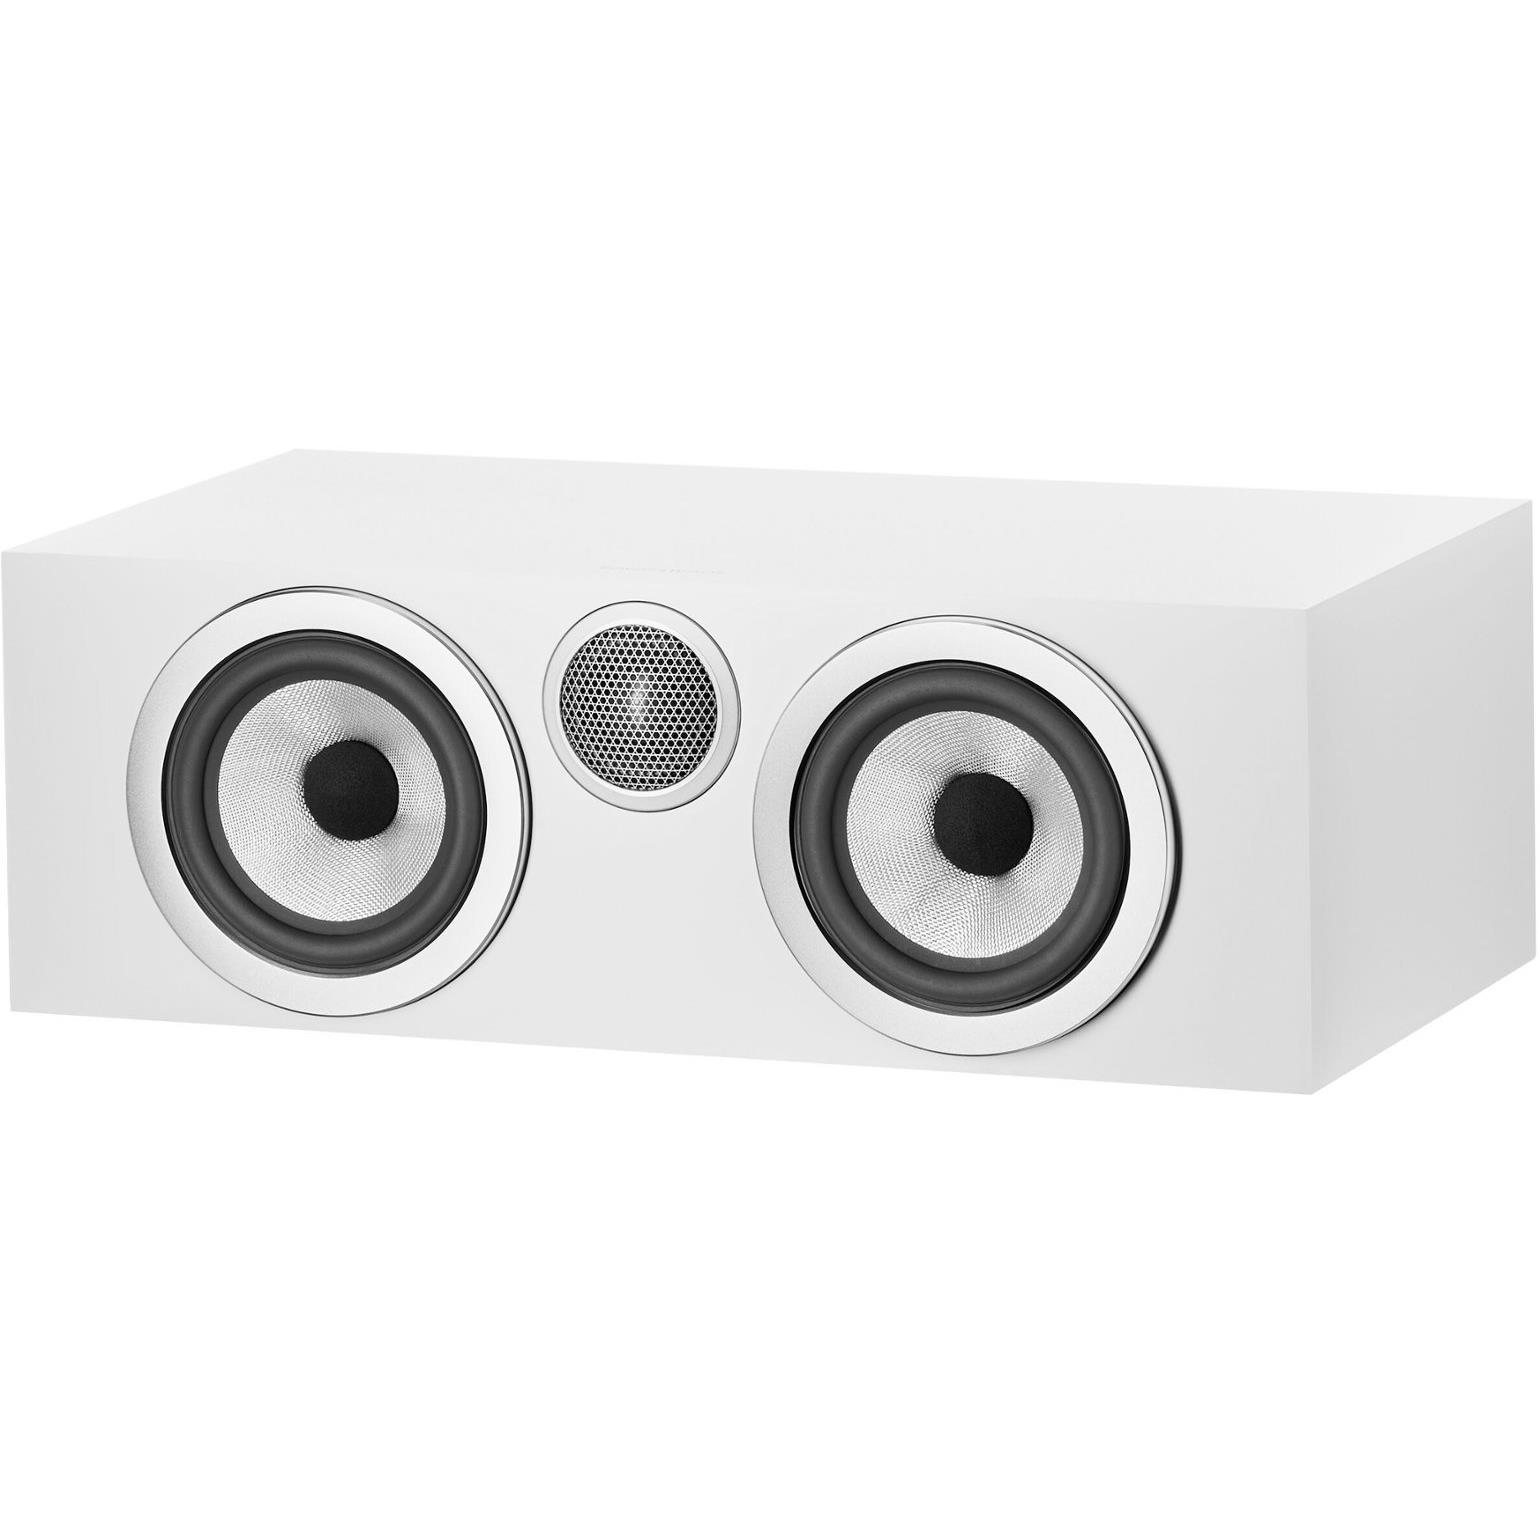 Bowers & Wilkins HTM72 S3 - Satin White - FP43427